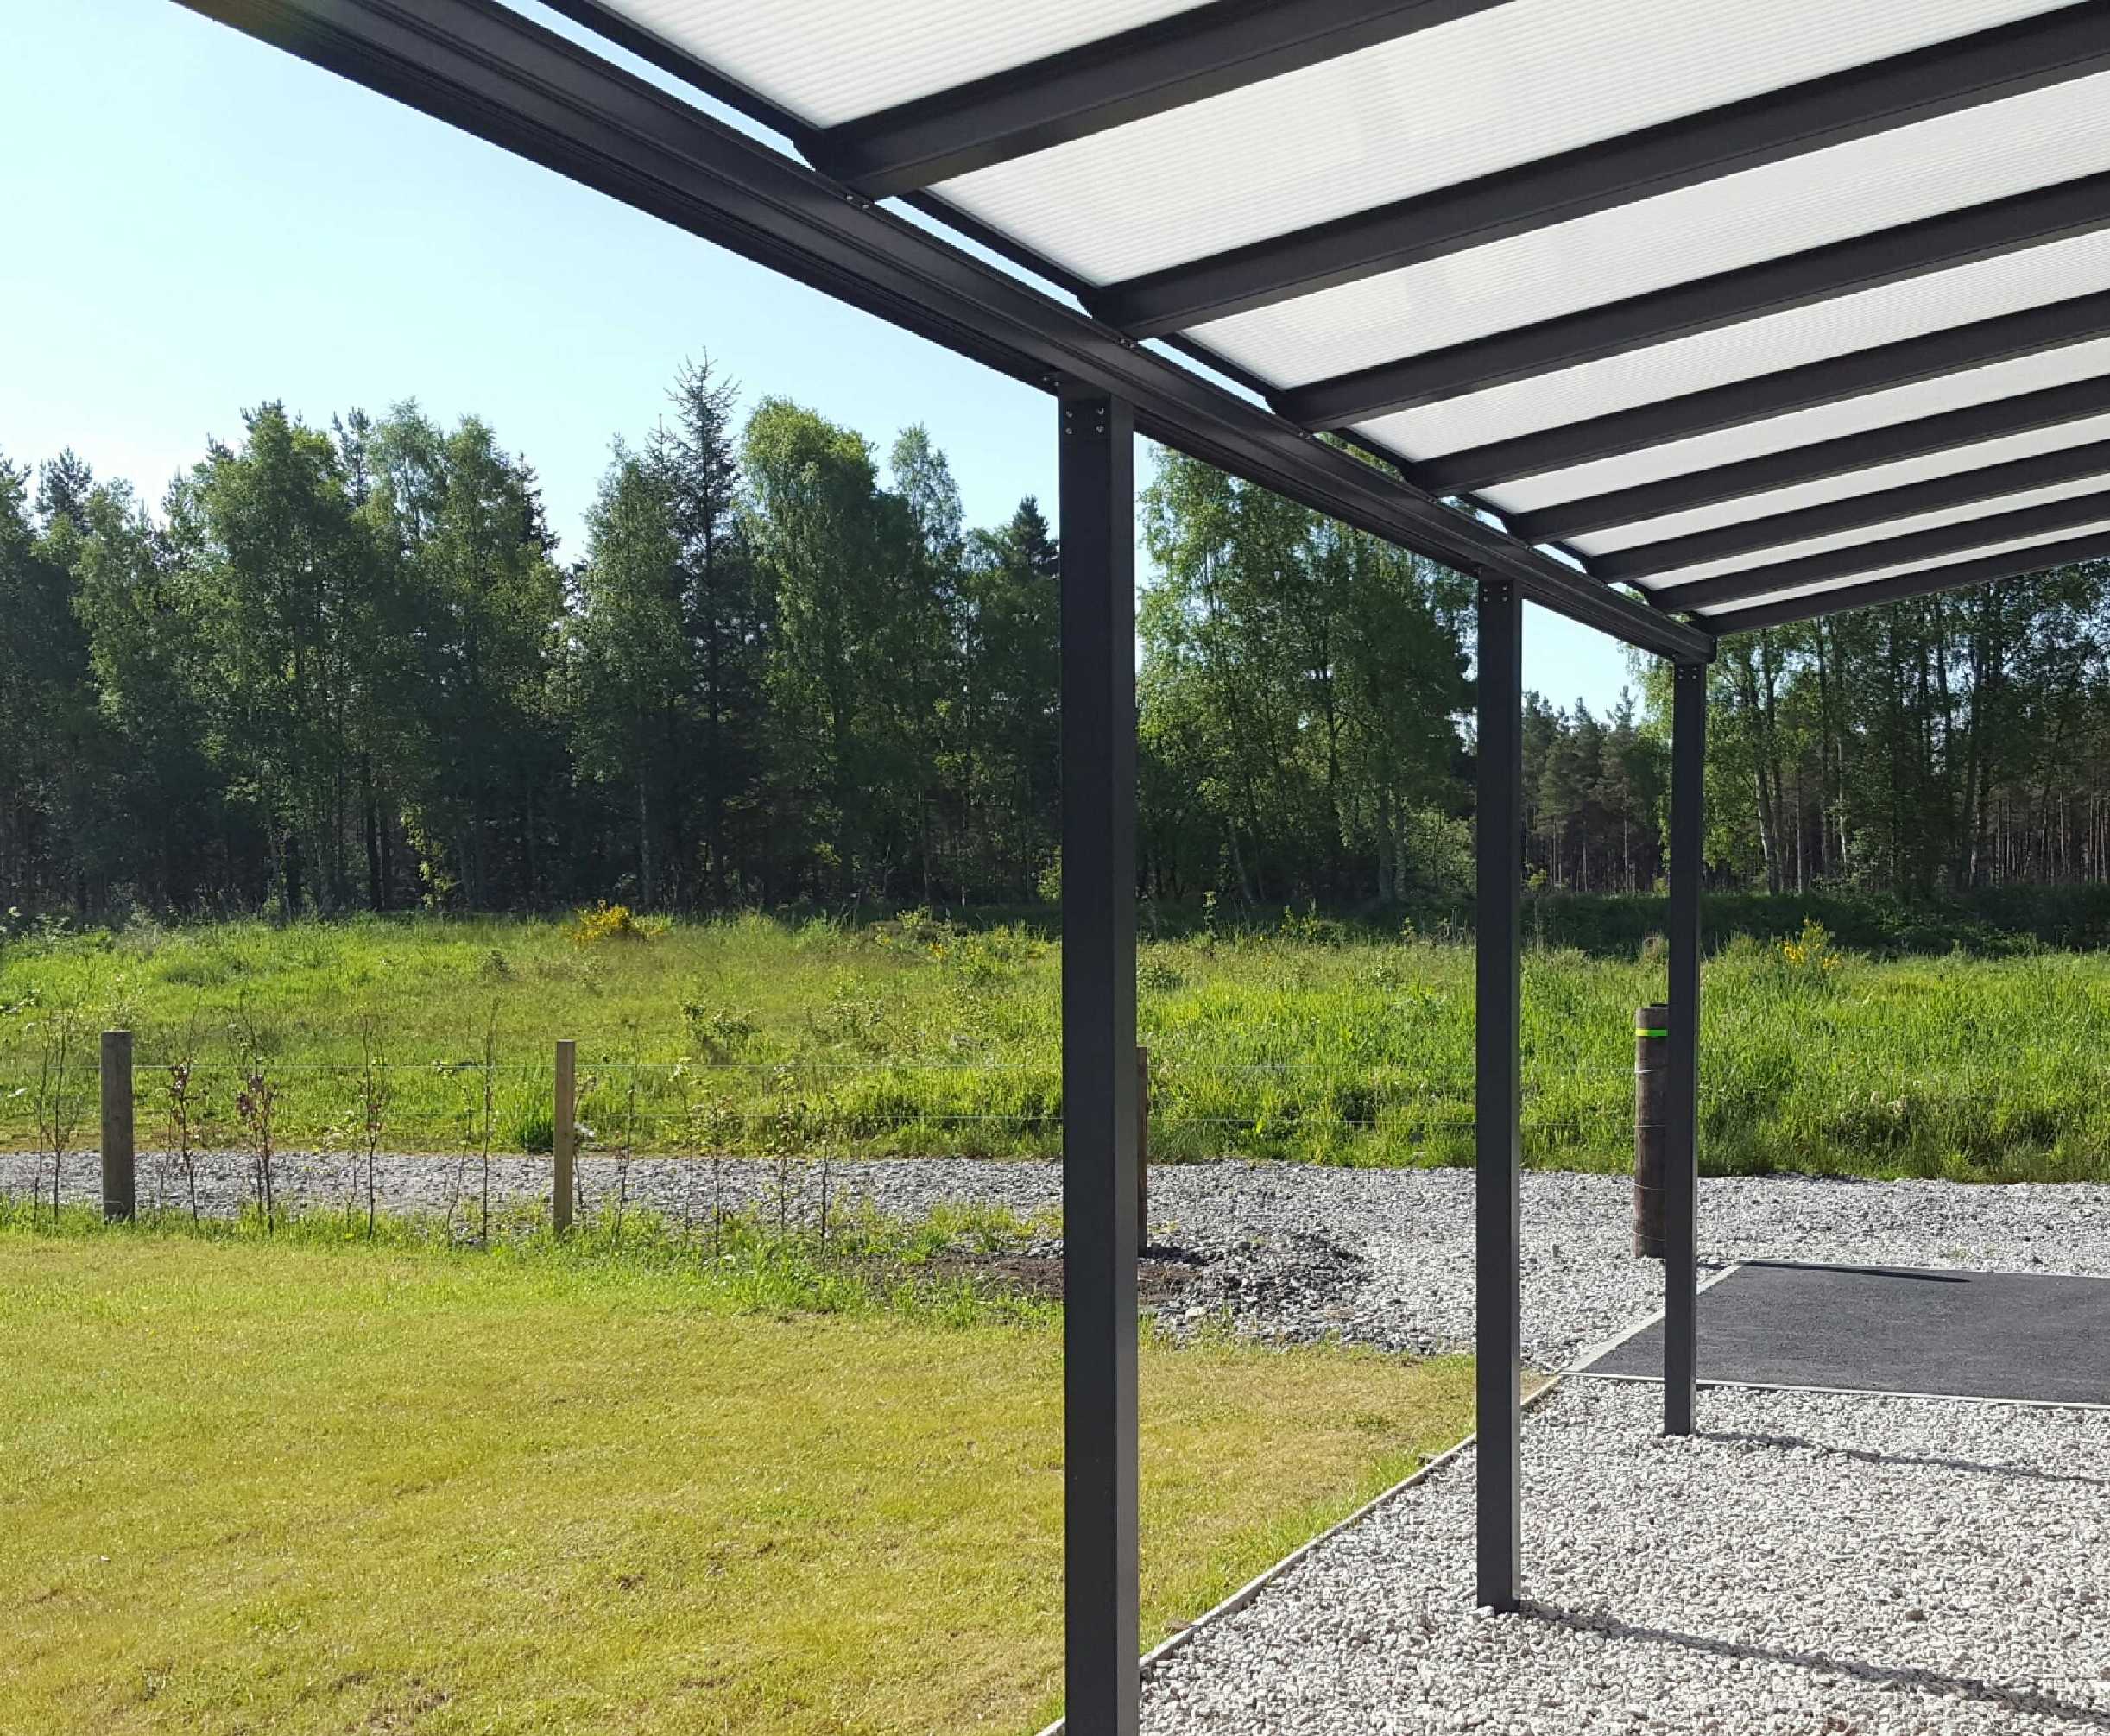 Omega Smart Lean-To Canopy, Anthracite Grey, 16mm Polycarbonate Glazing - 11.6m (W) x 1.5m (P), (5) Supporting Posts